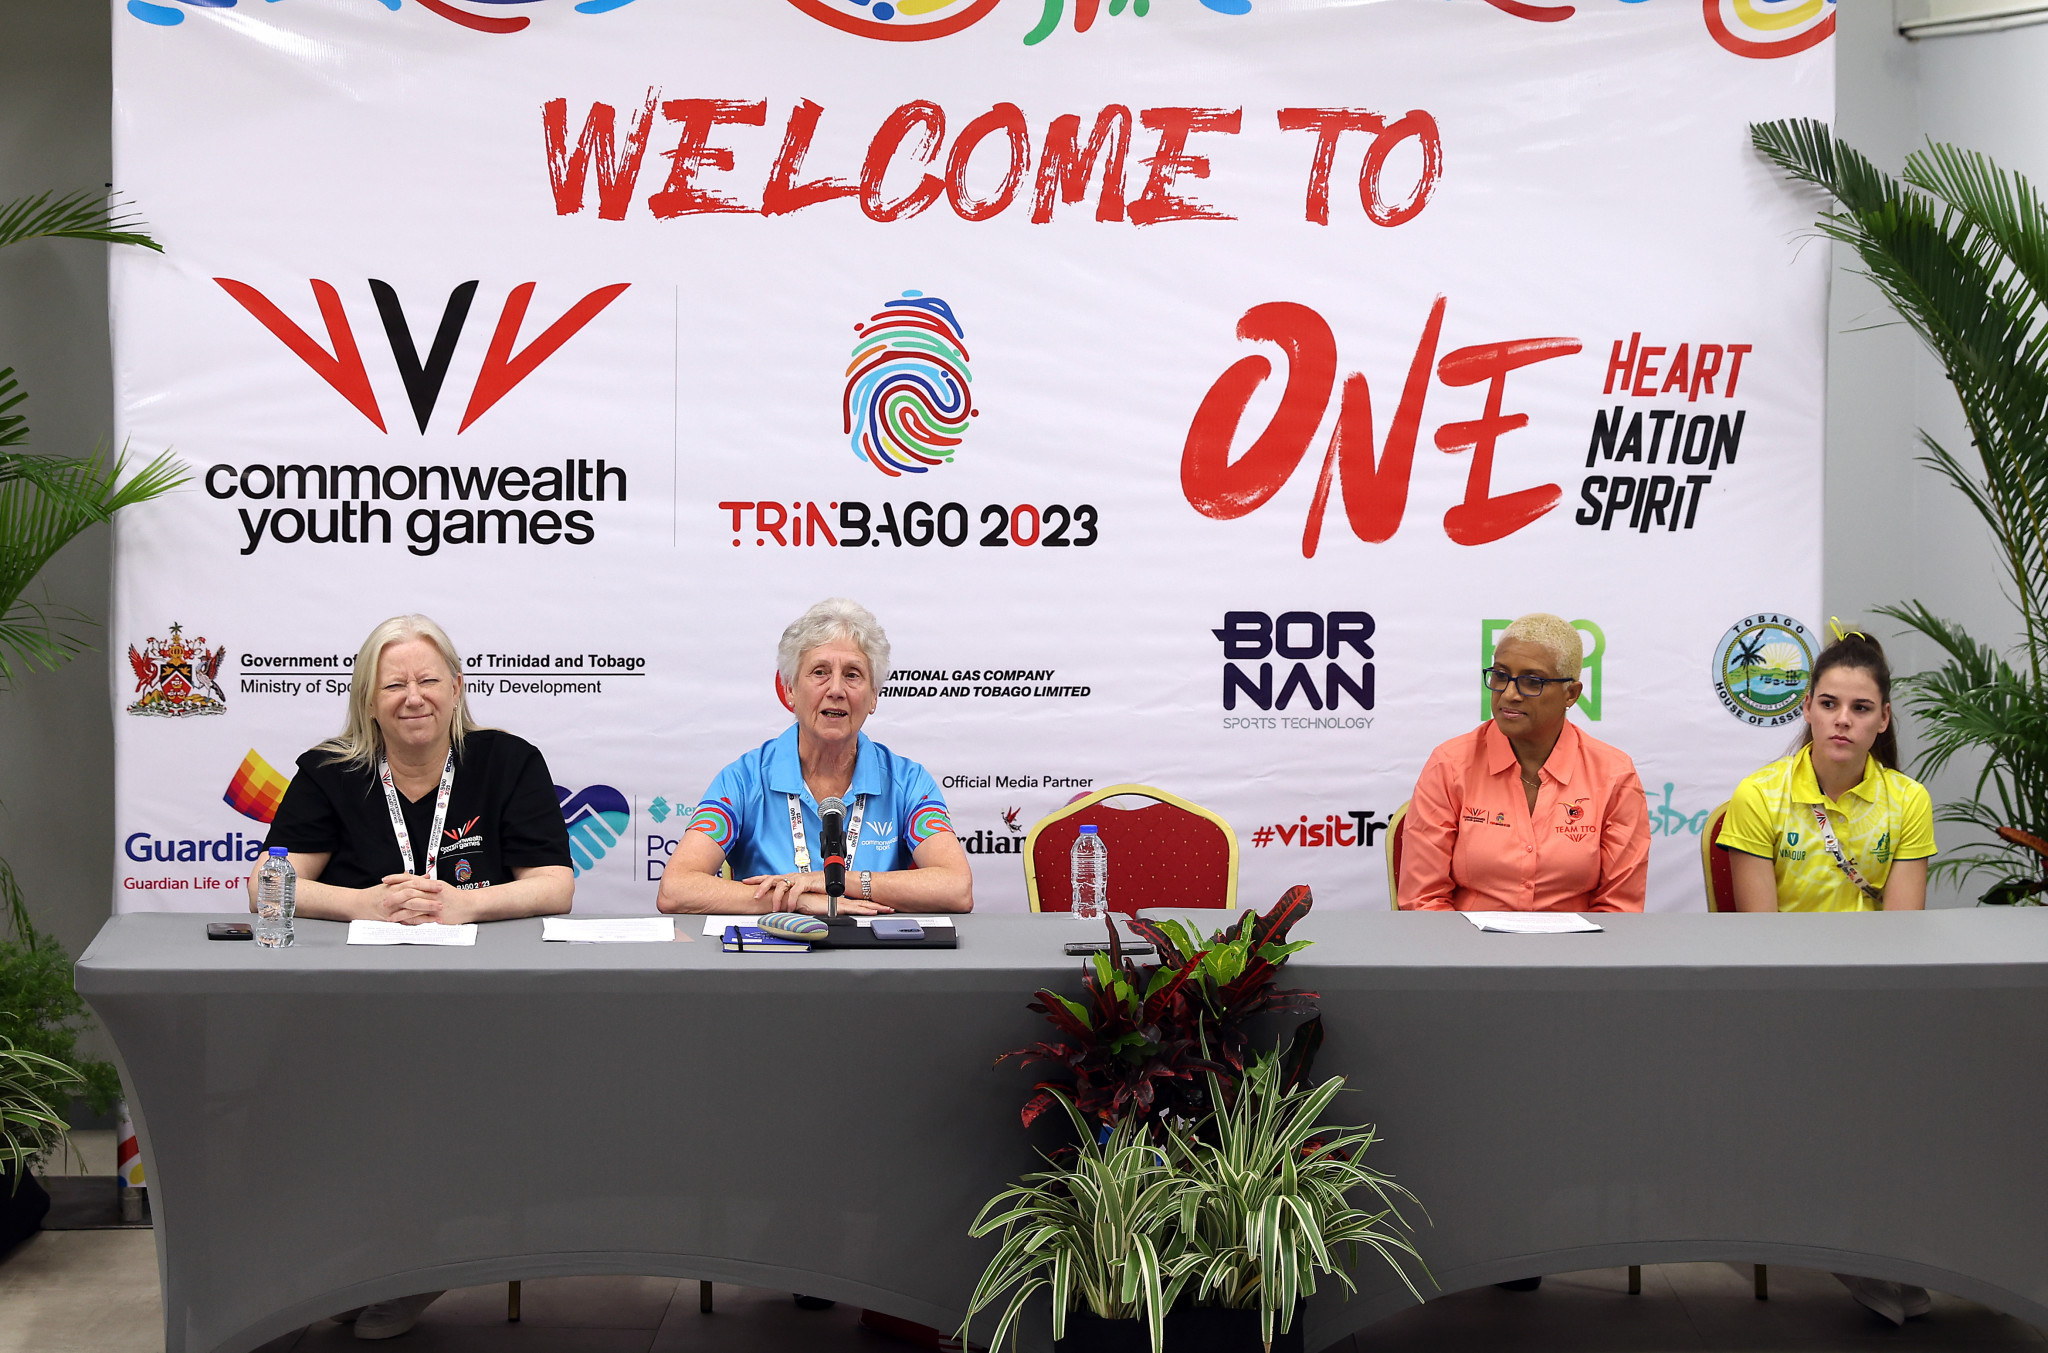 CGF President Dame Louise Martin, second left, predicted the Commonwealth Youth Games will 